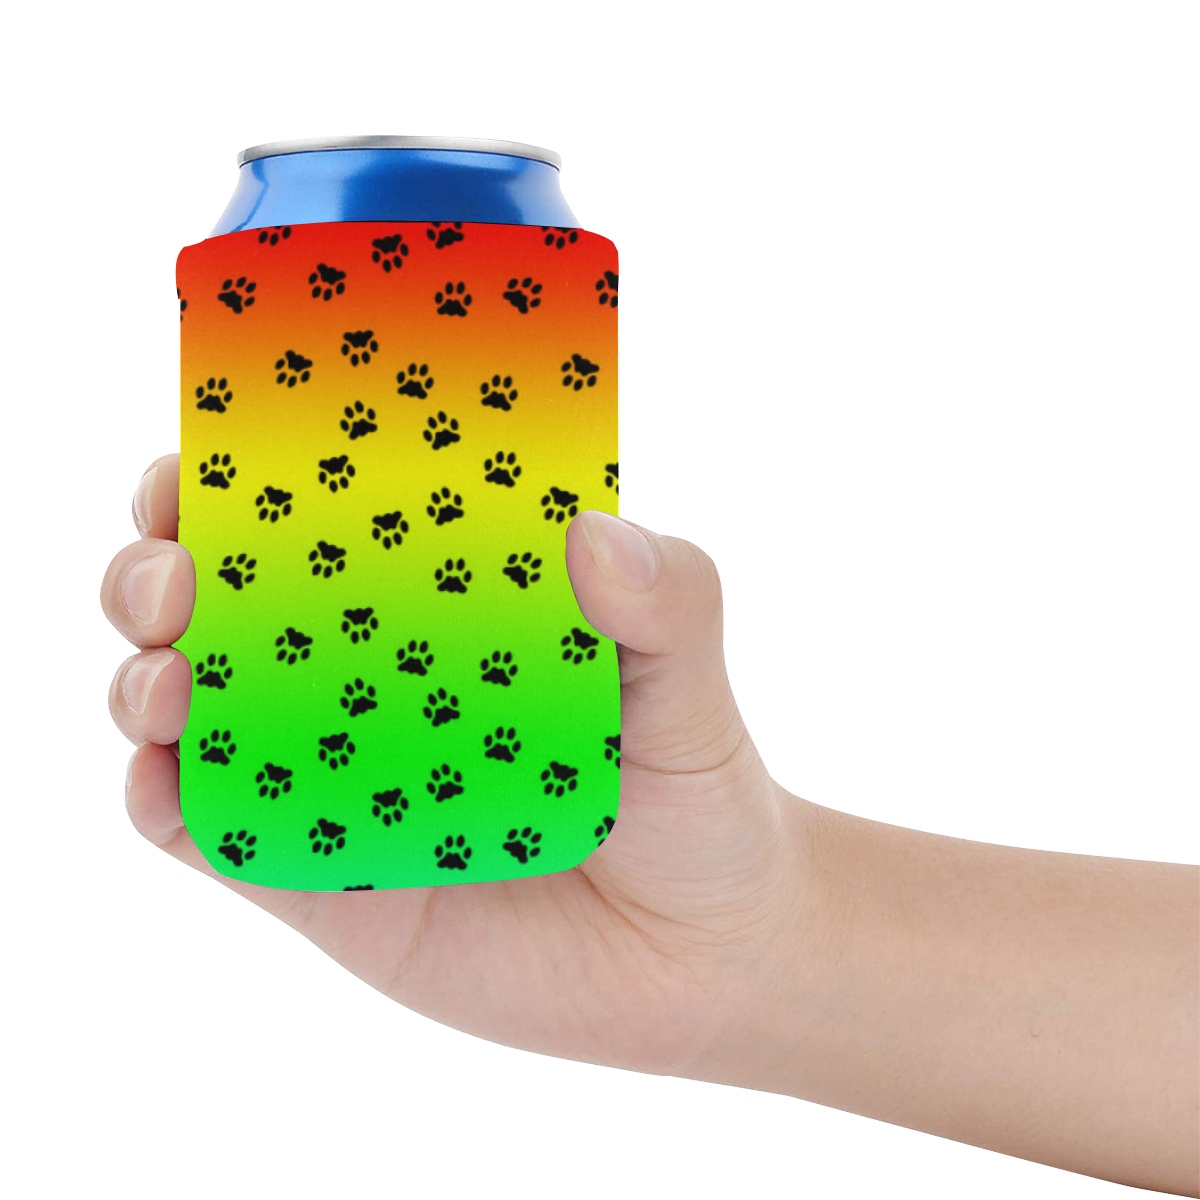 rainbow with black paws Neoprene Can Cooler 4" x 2.7" dia.